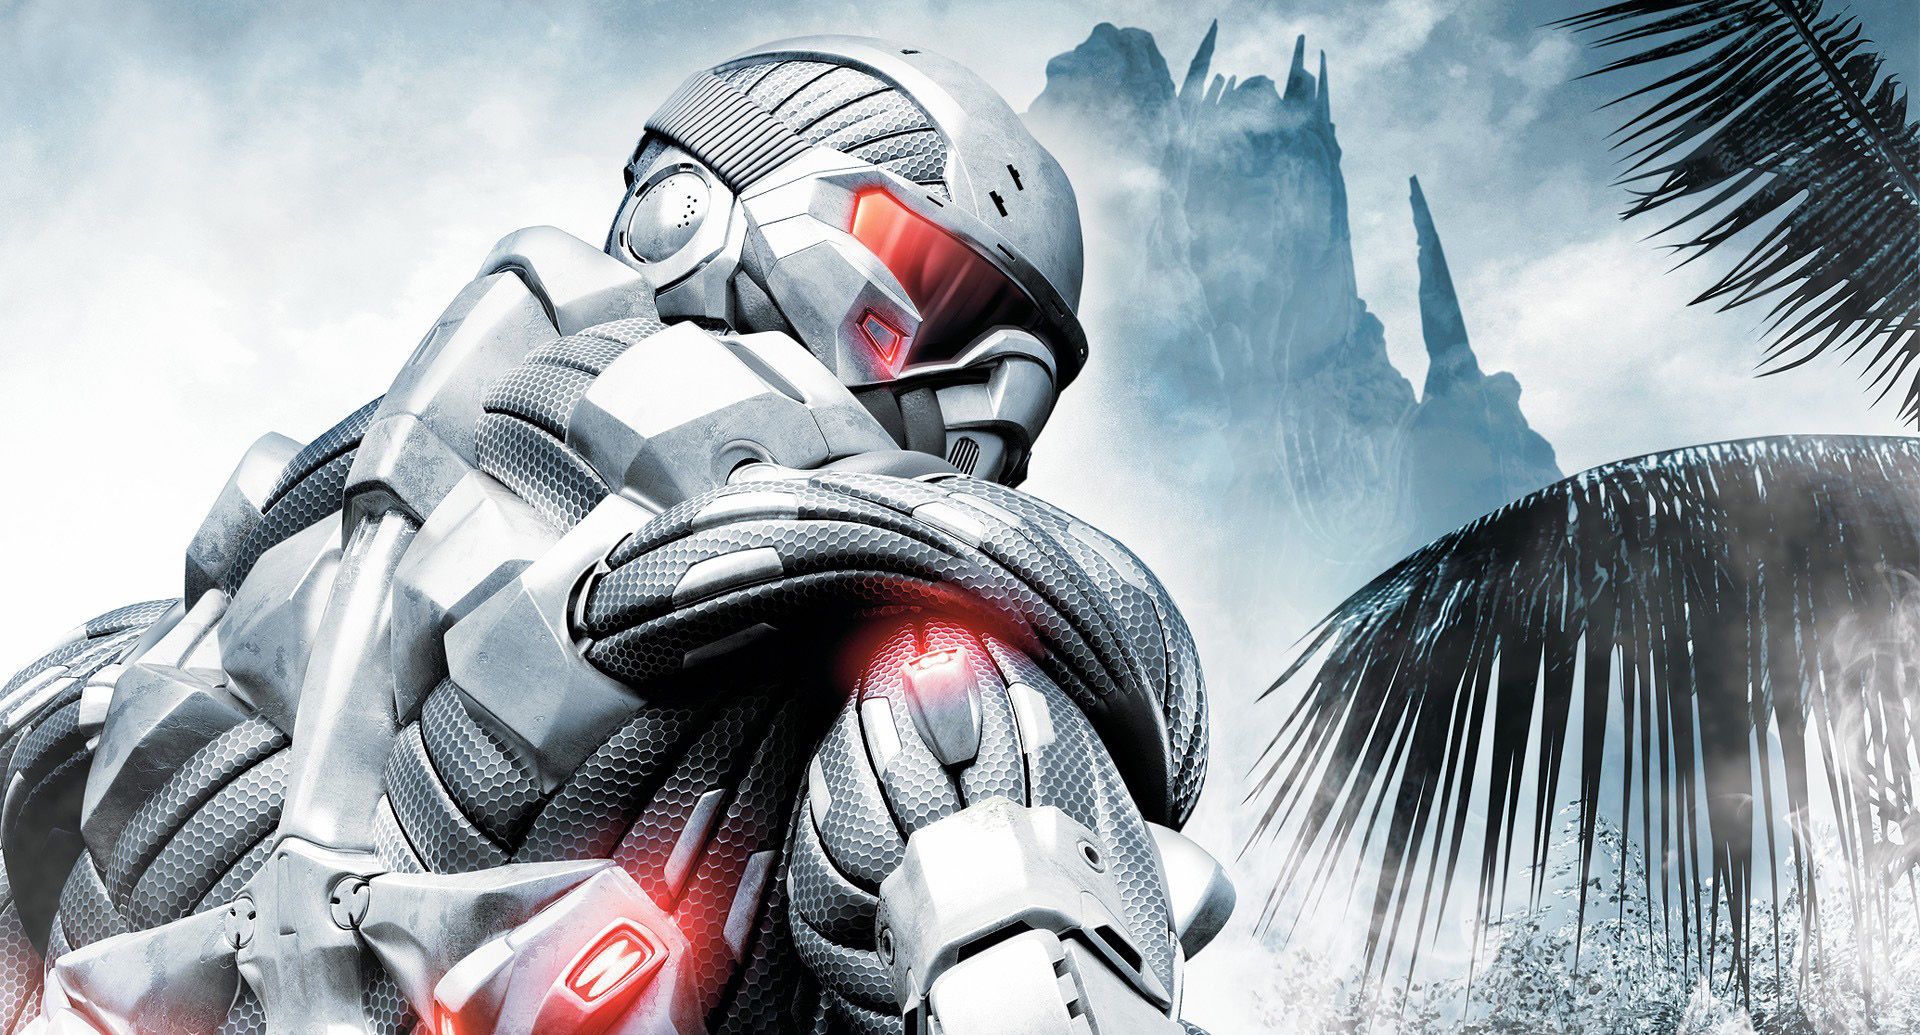 Crysis Remastered Co Developed By The Witcher 3 Switch Studio Saber Interactive